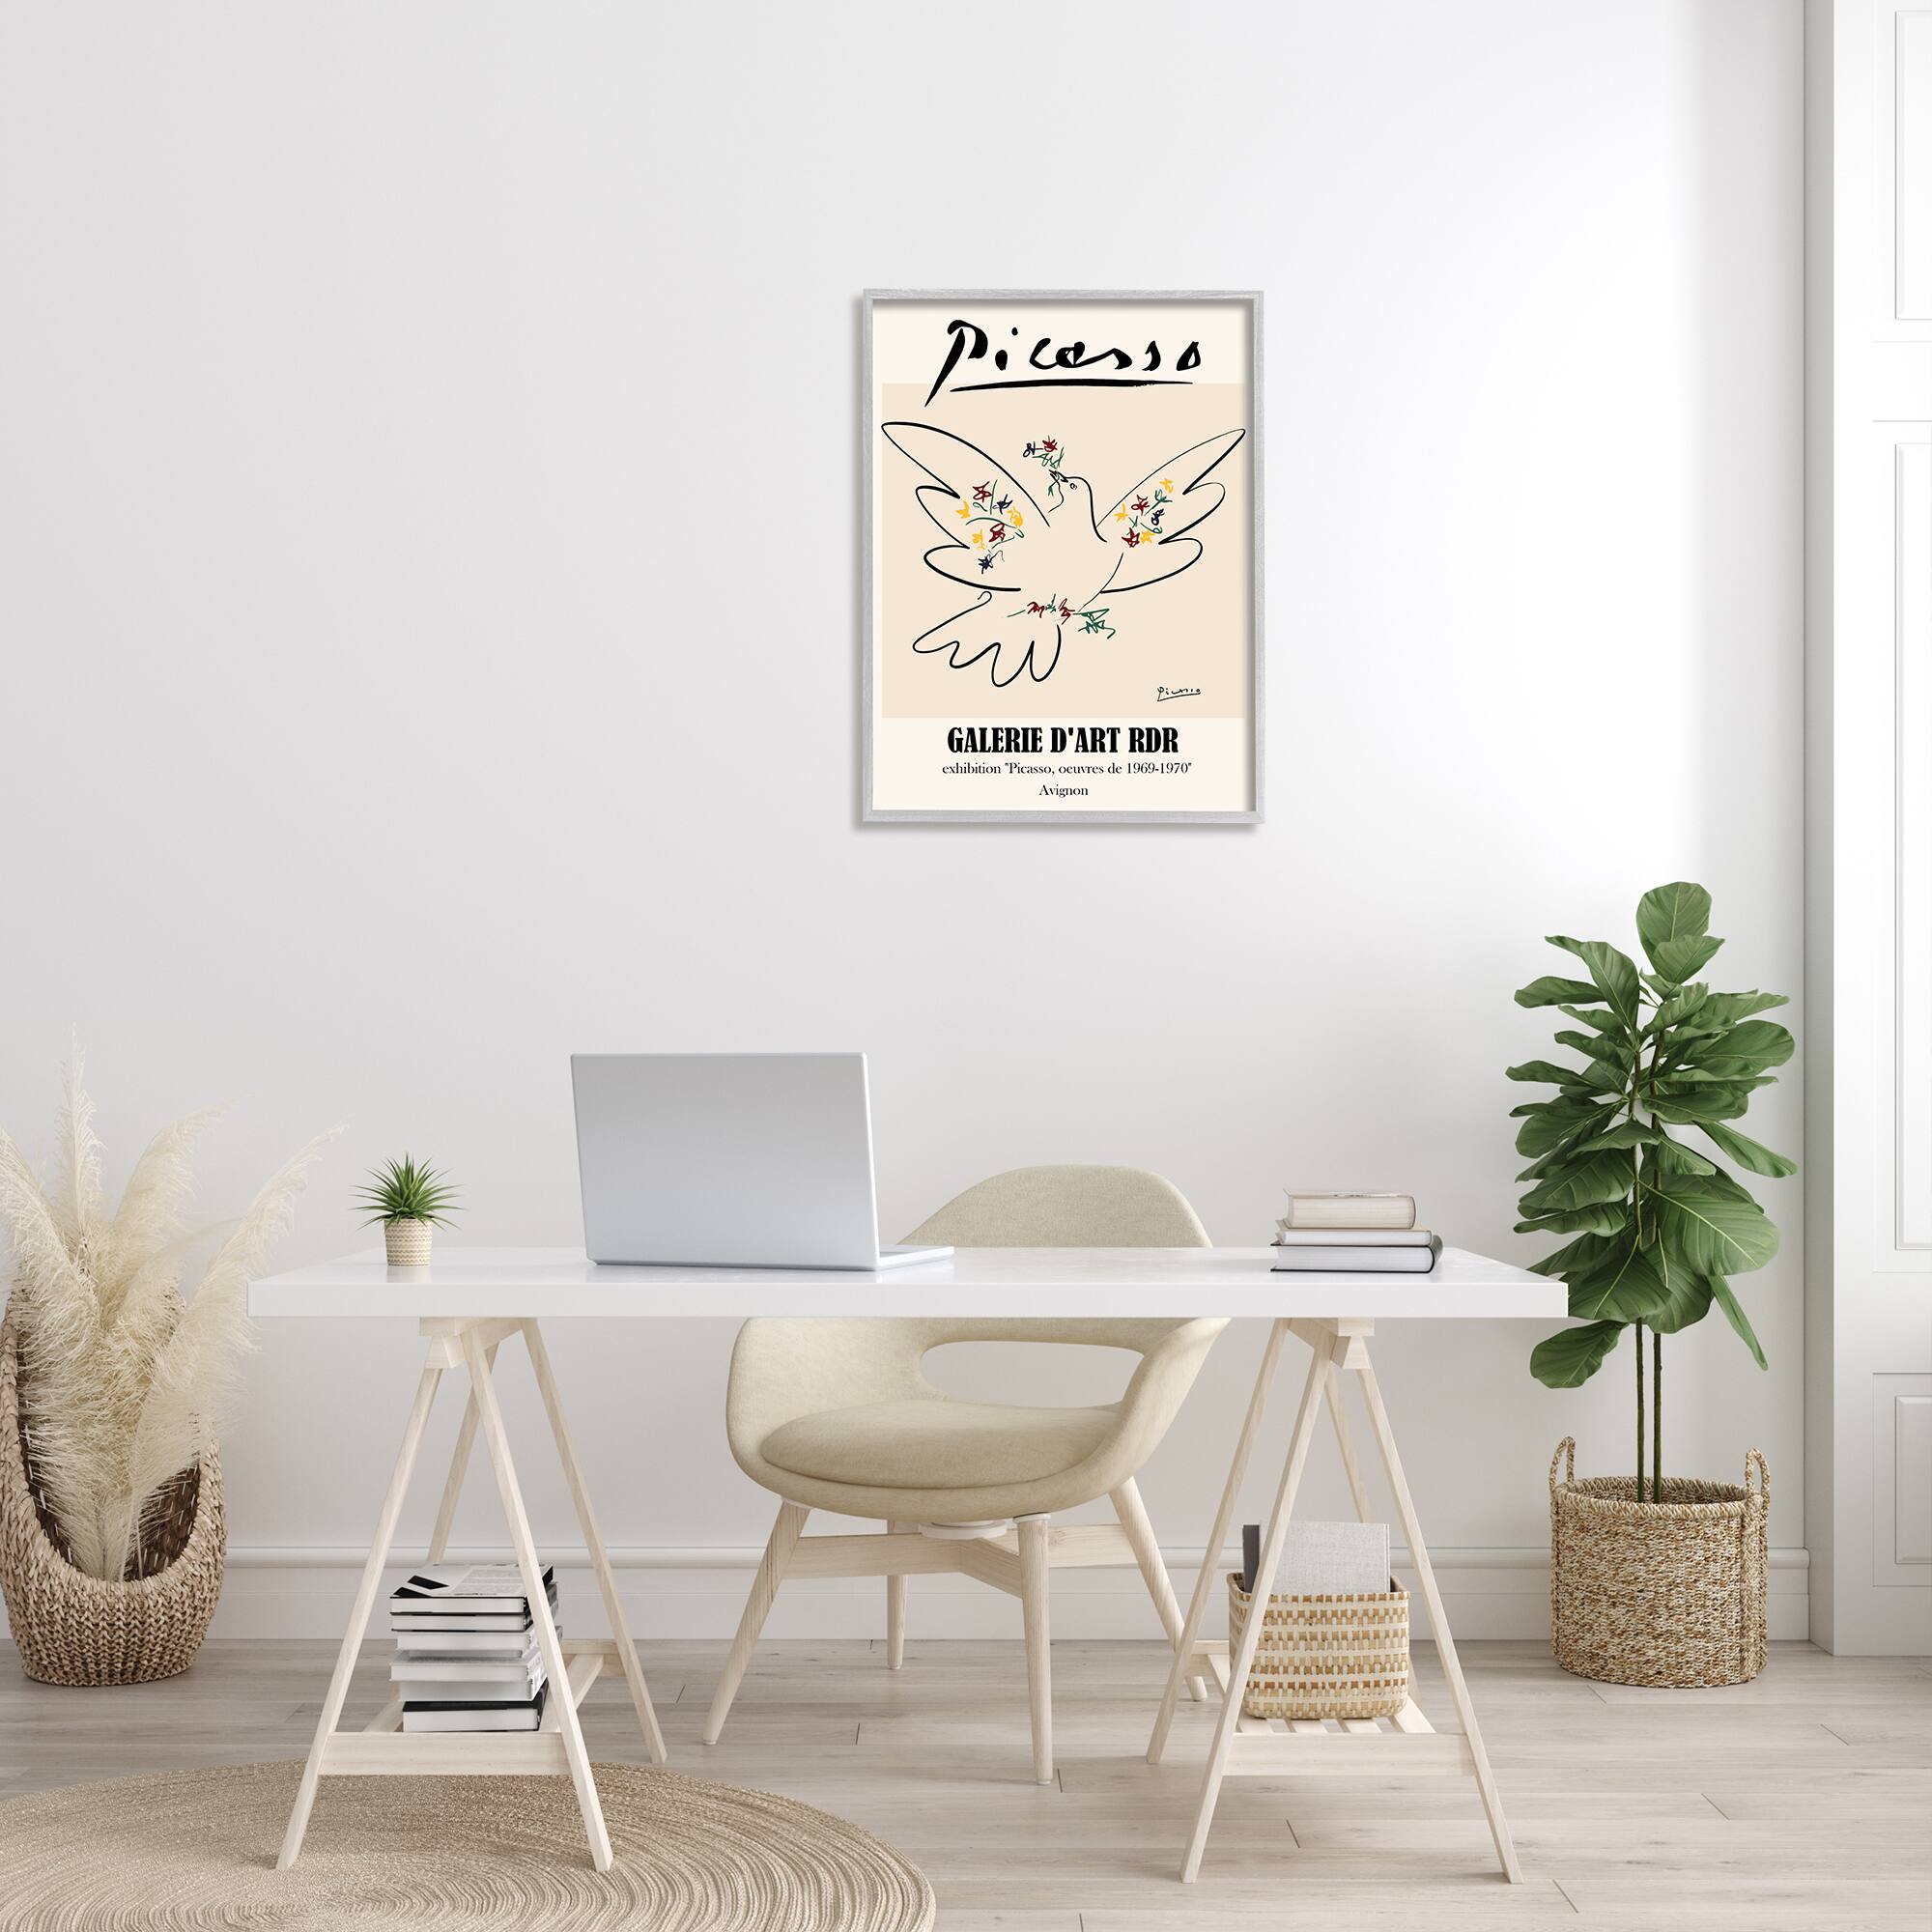 Stupell Industries Classical Abstract Picasso Peace Dove Bird Linework in Gray Frame Wall Art